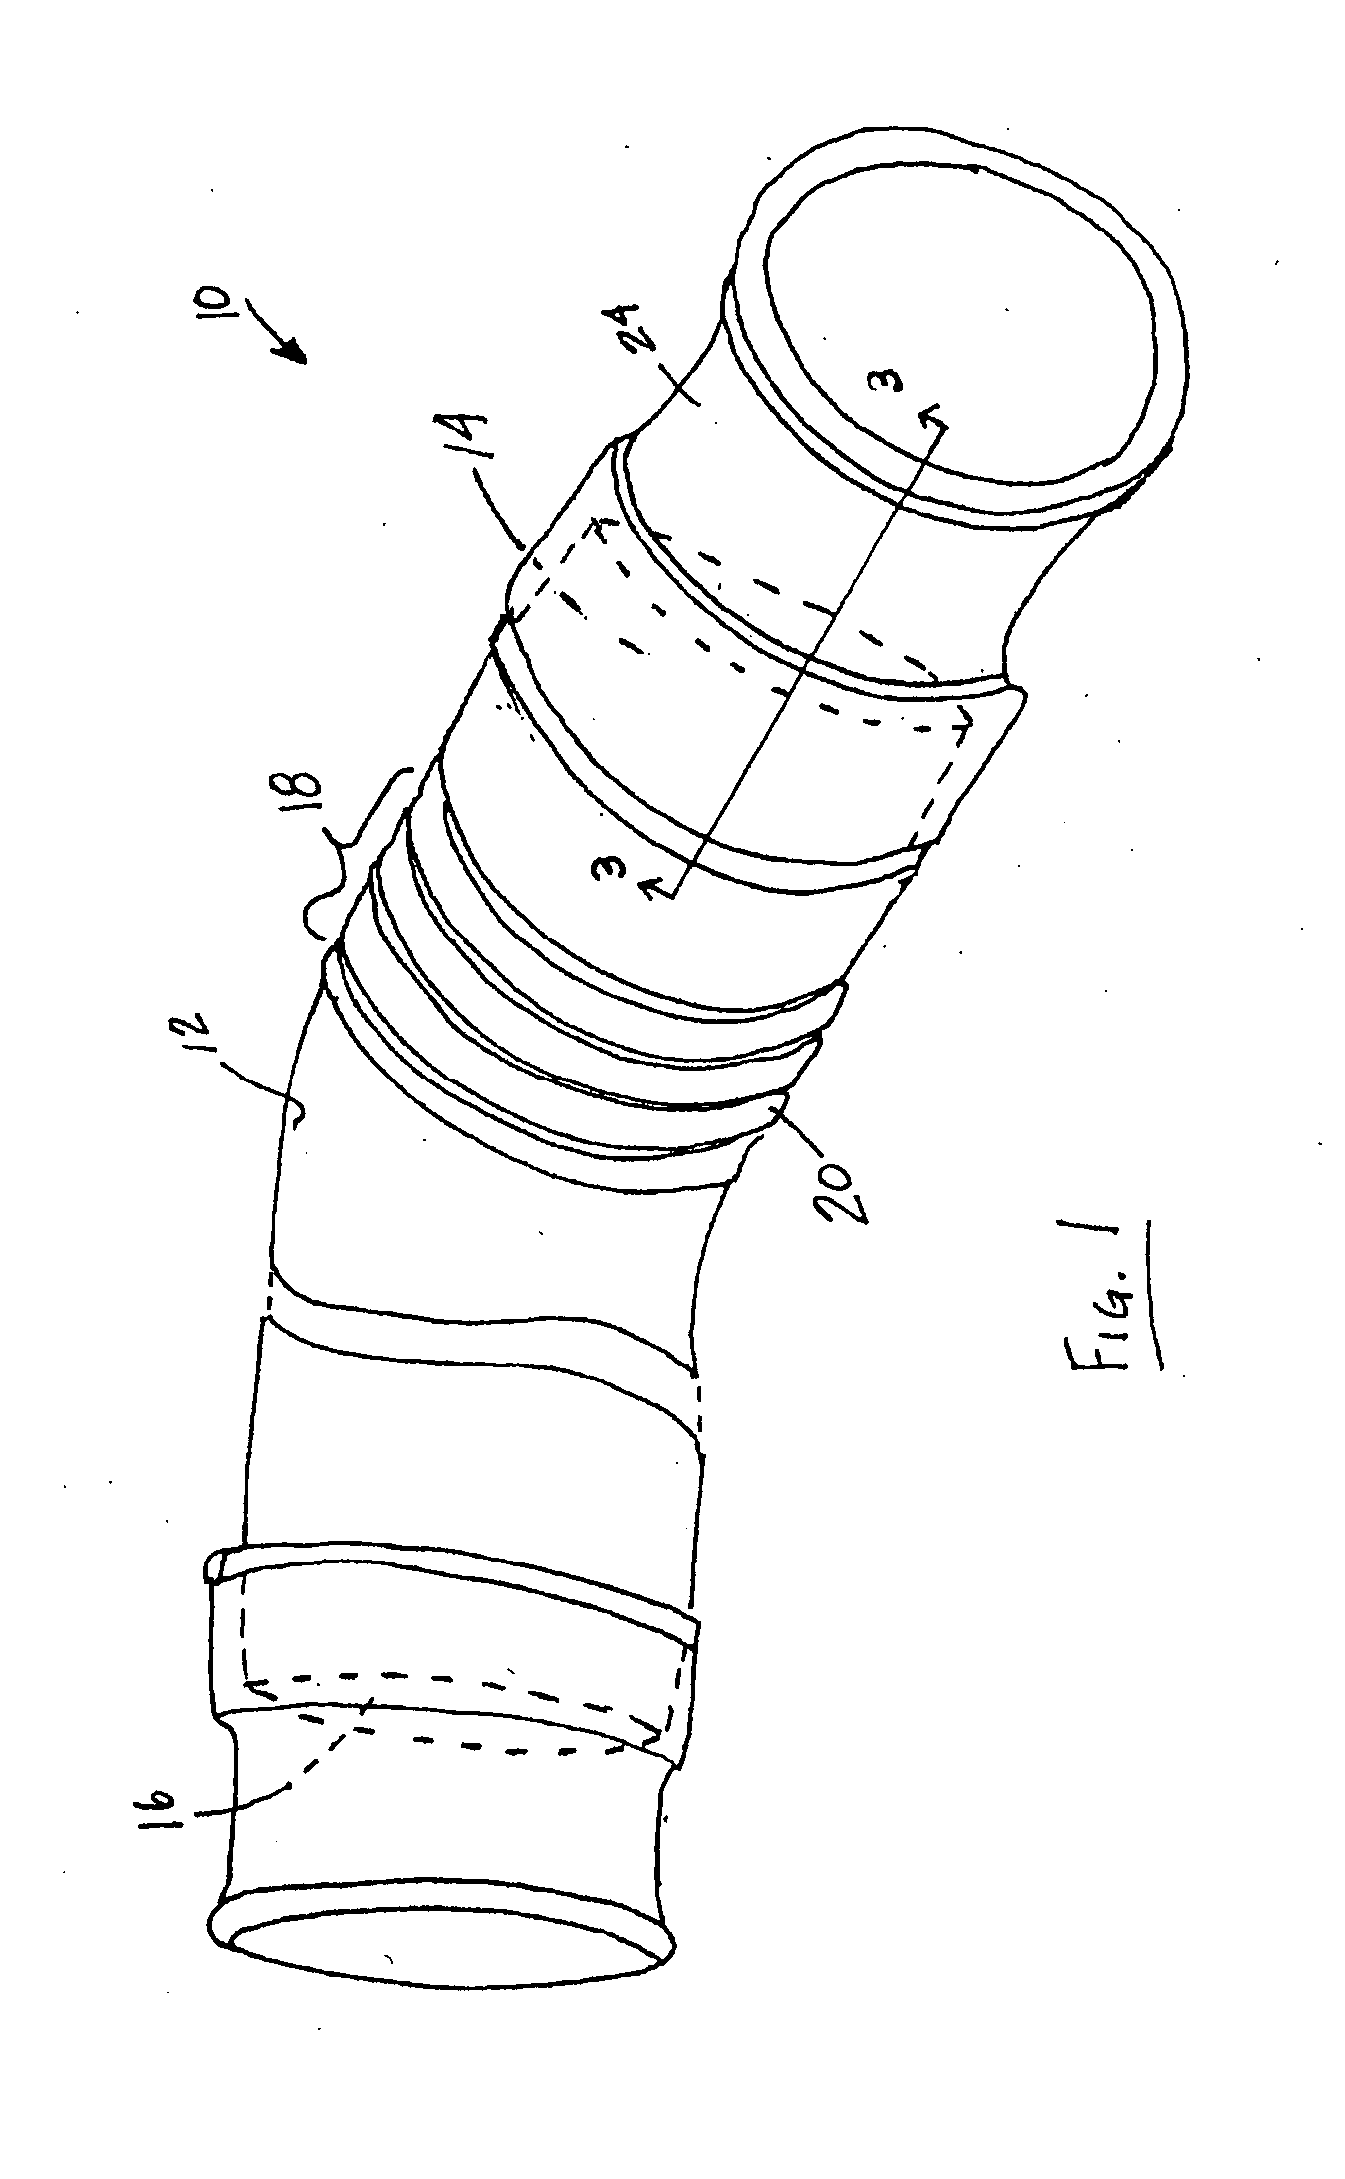 Two-shot or insert molded cuffs for welding onto clean air ducts